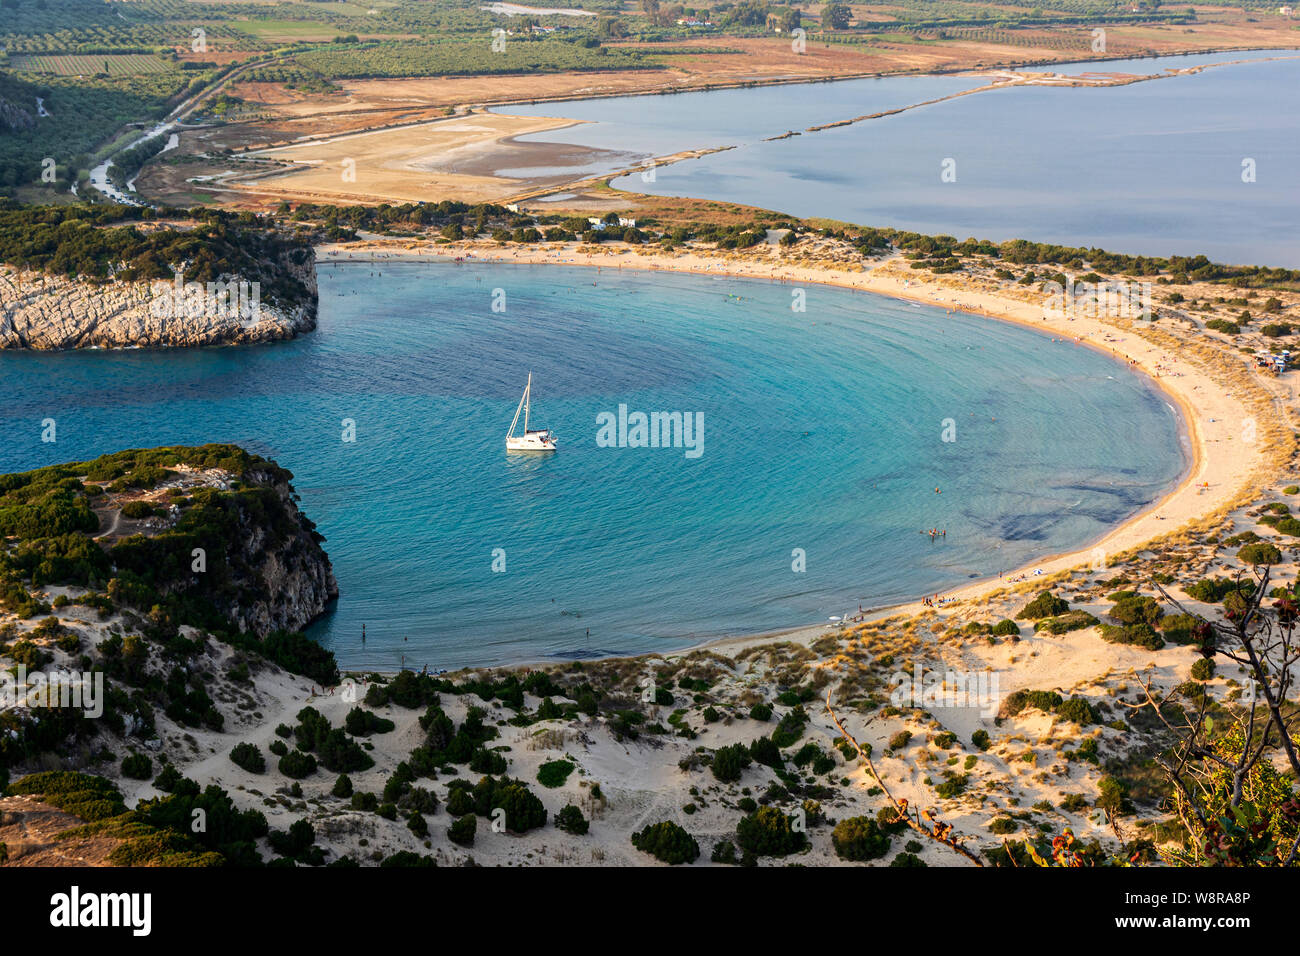 View of Voidokilia beach in the Peloponnese region of Greece, from the Palaiokastro (old Navarino Castle). Stock Photo